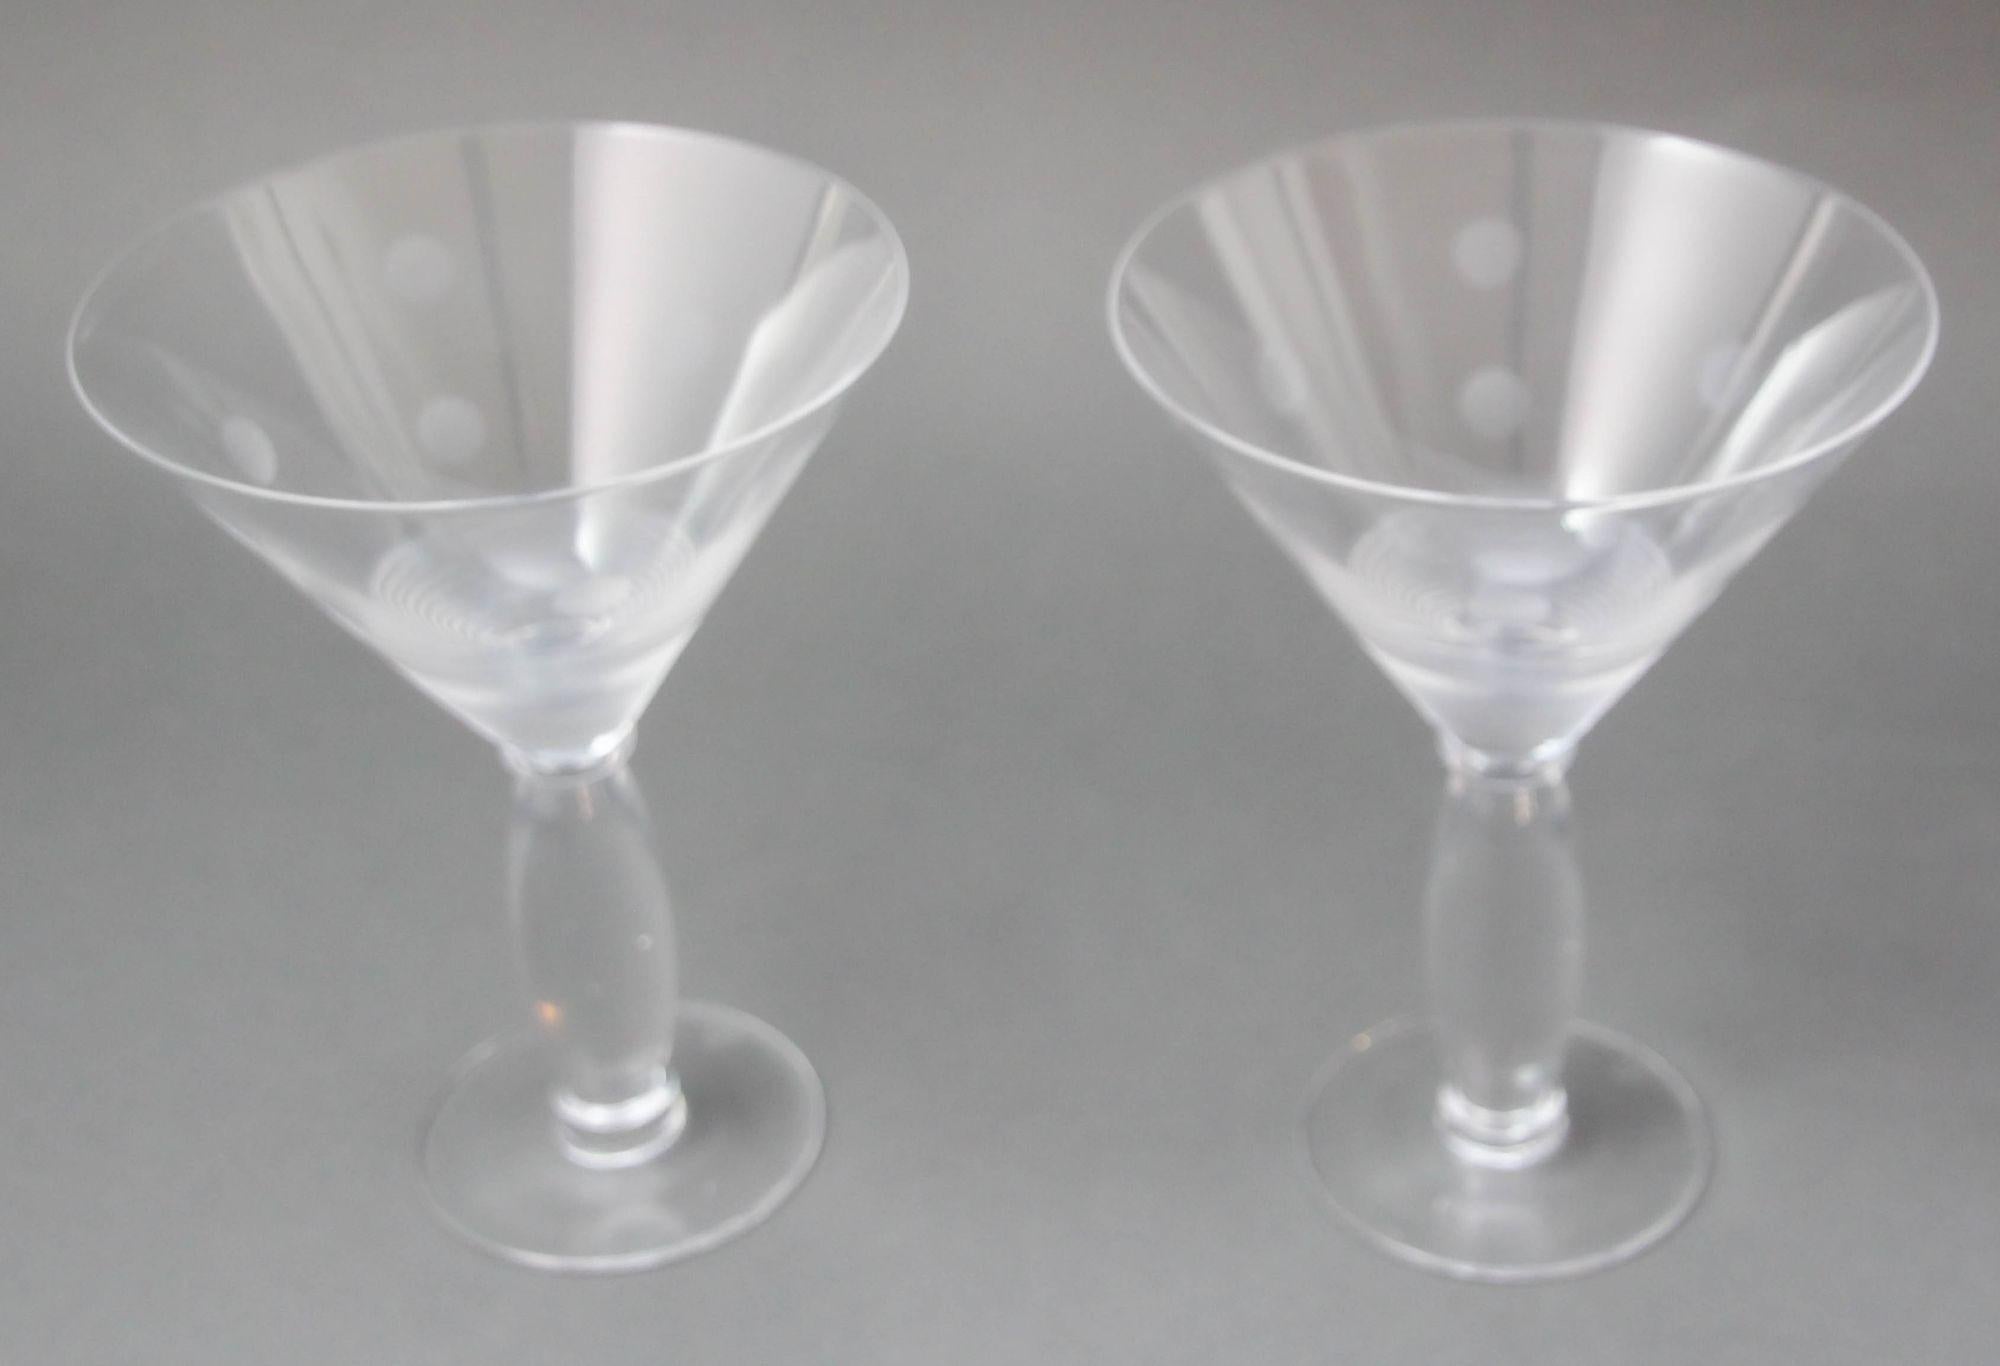 Vintage ROYAL DOULTON Martini Crystal clear Etched Glasses Set of 2.Royal Doulton précieux cristal barware cocktail glasses with a unique handmade etched bubble polka dots pattern.Great addition to your home bar collection.Hallmark : Ils portent la